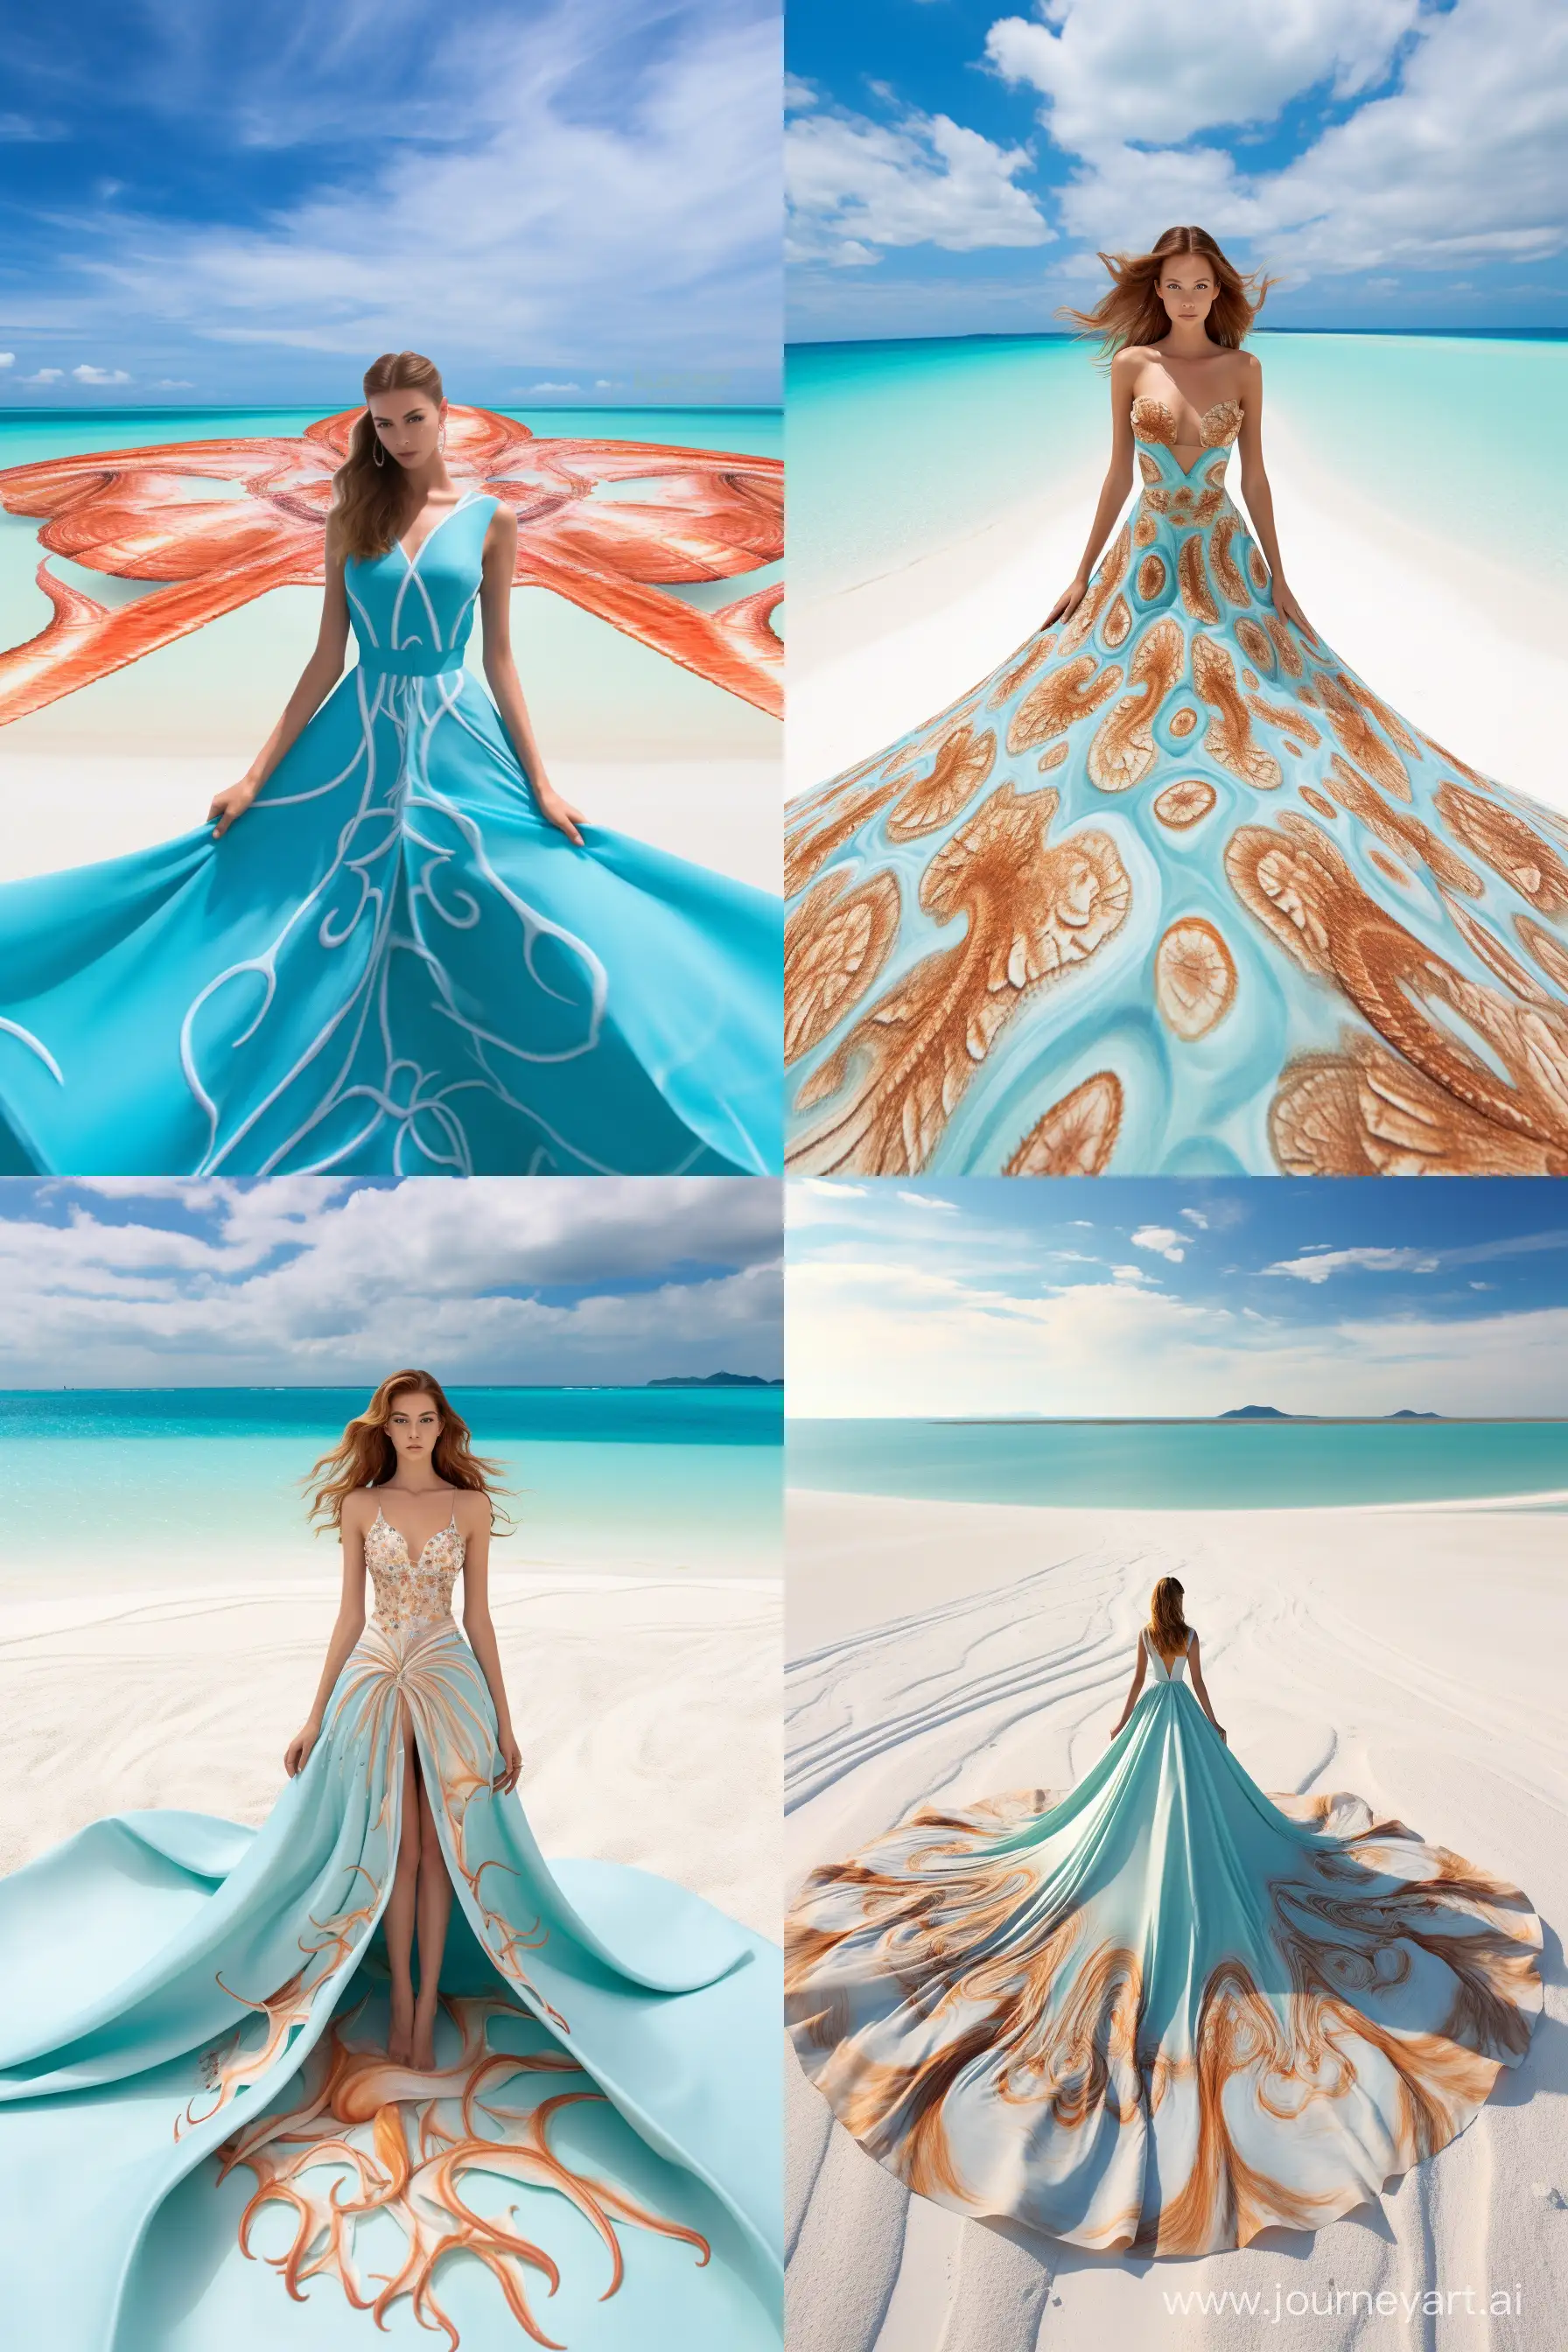 High-Fashion-Octopus-Dress-Photoshoot-on-Tropical-Beach-at-Sunset